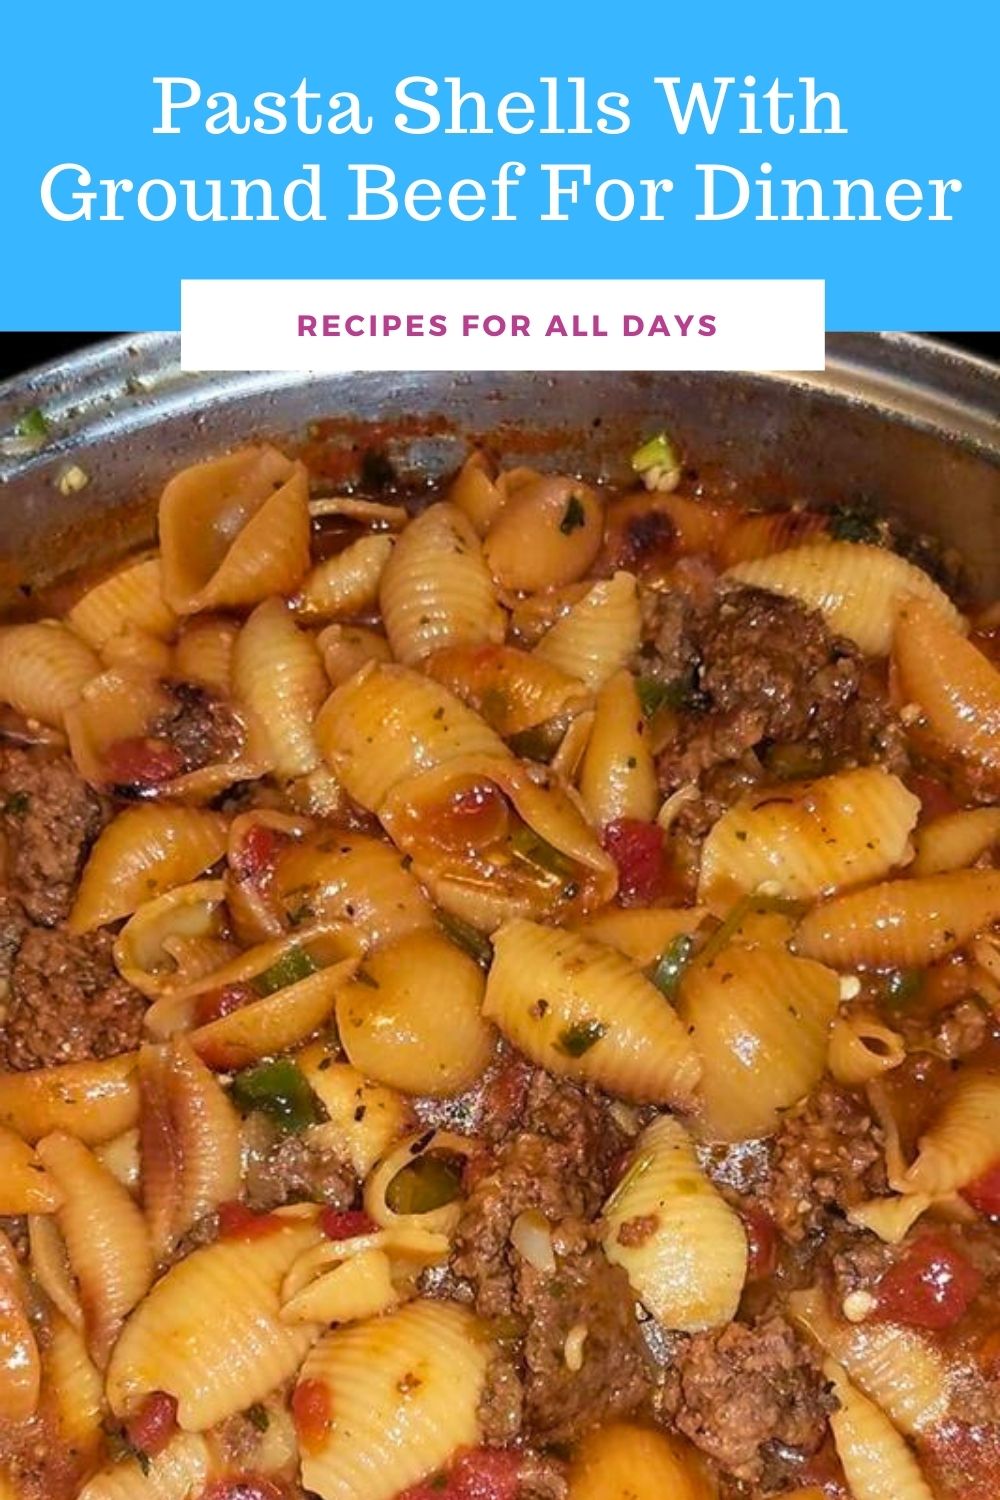 Pasta Shells With Ground Beef For Dinner